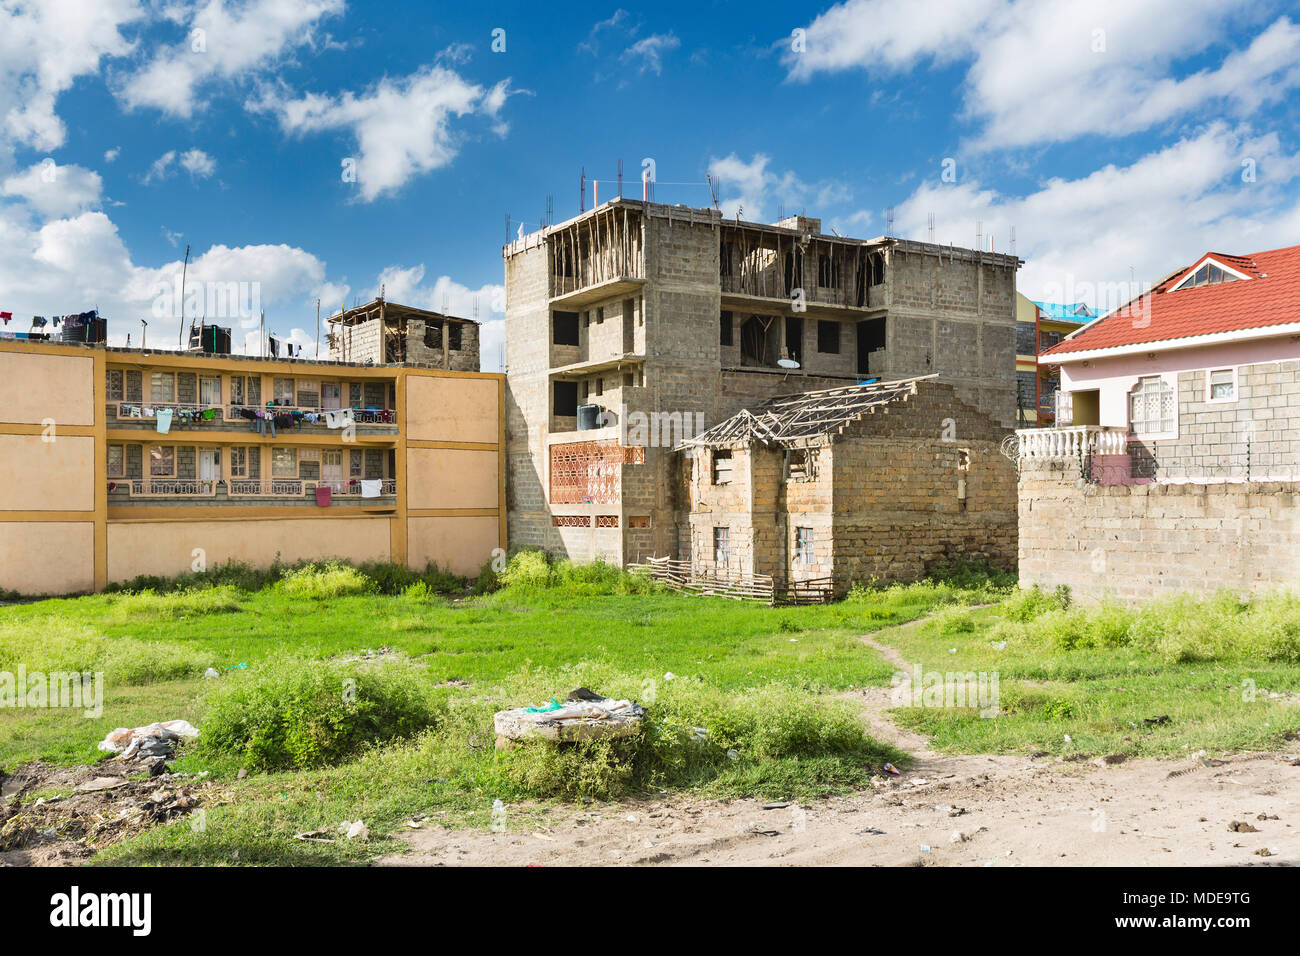 A ruin next to a building under construction, a typical view in the village of Tassia in east Nairobi, Kenya. Stock Photo